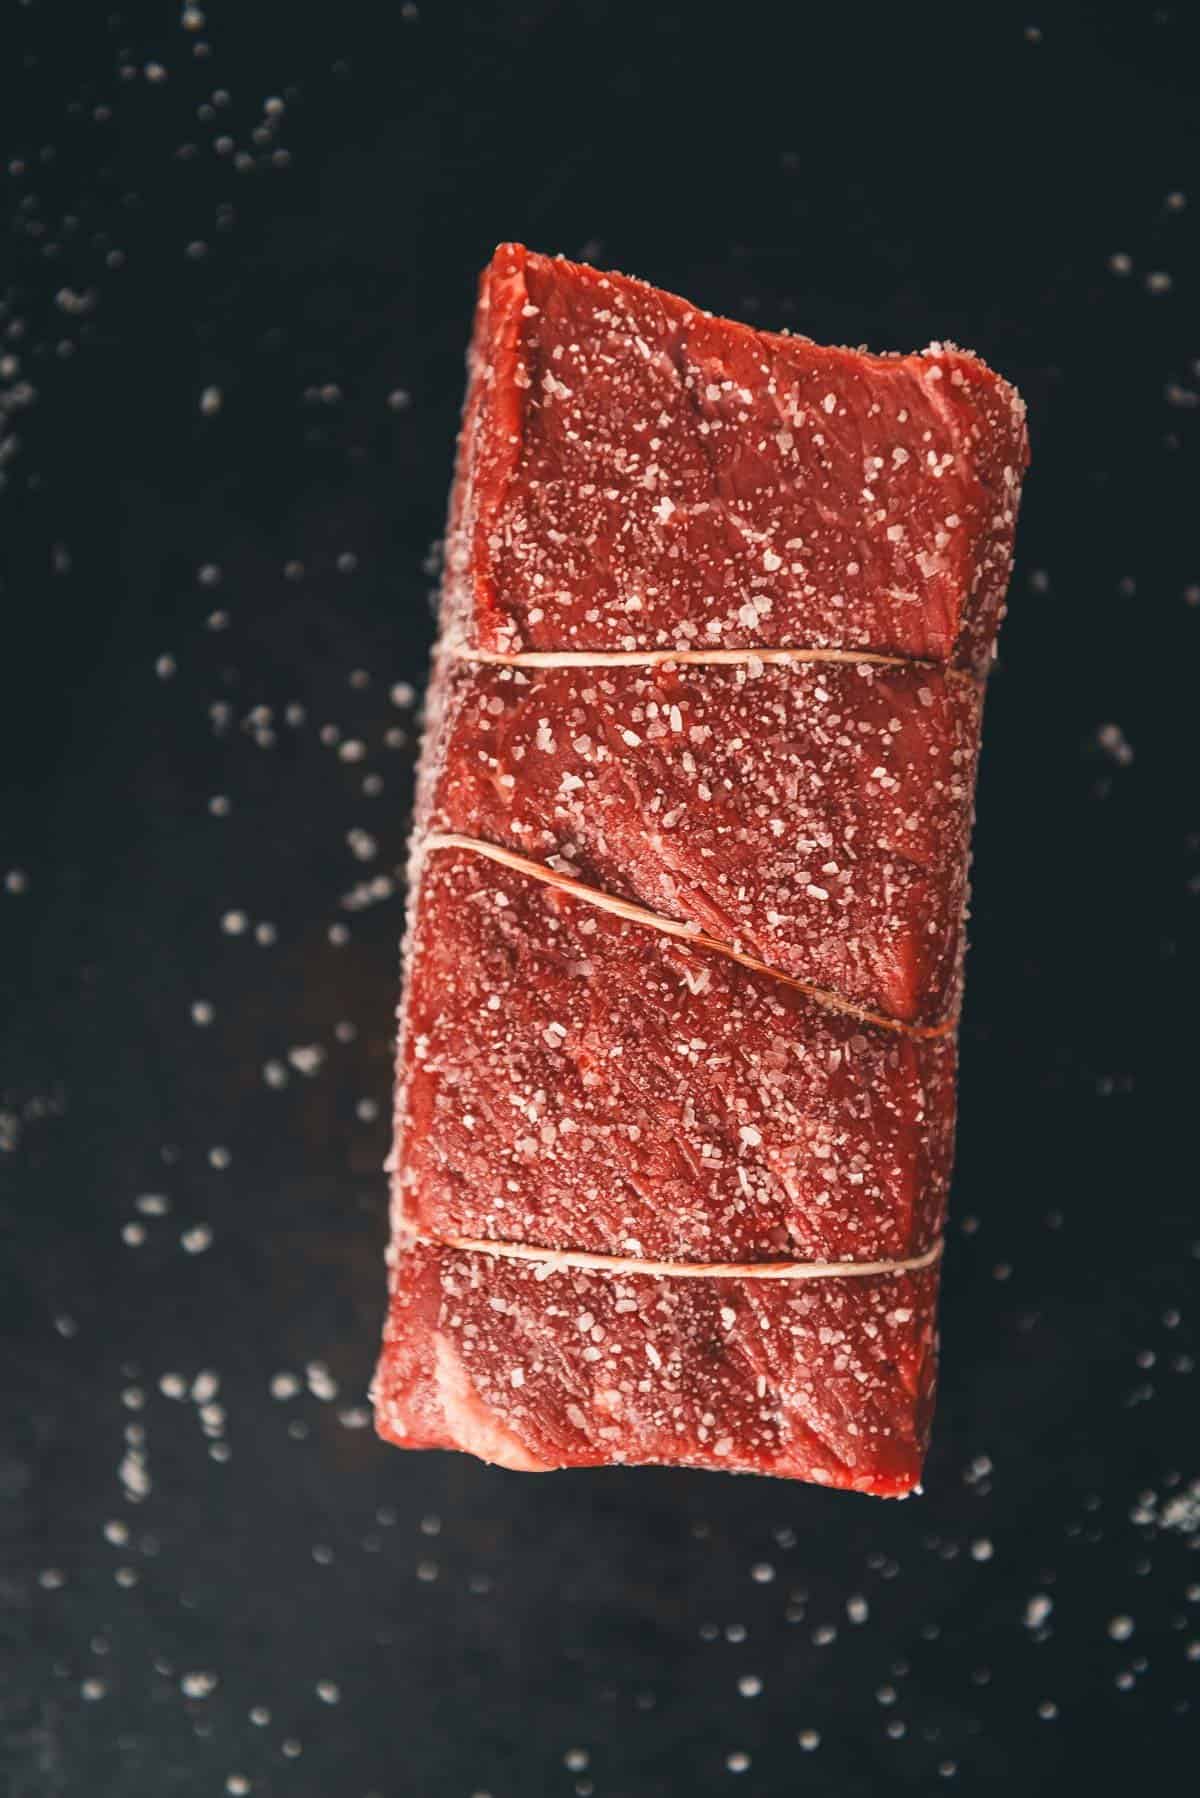 A piece of red meat on a black background.